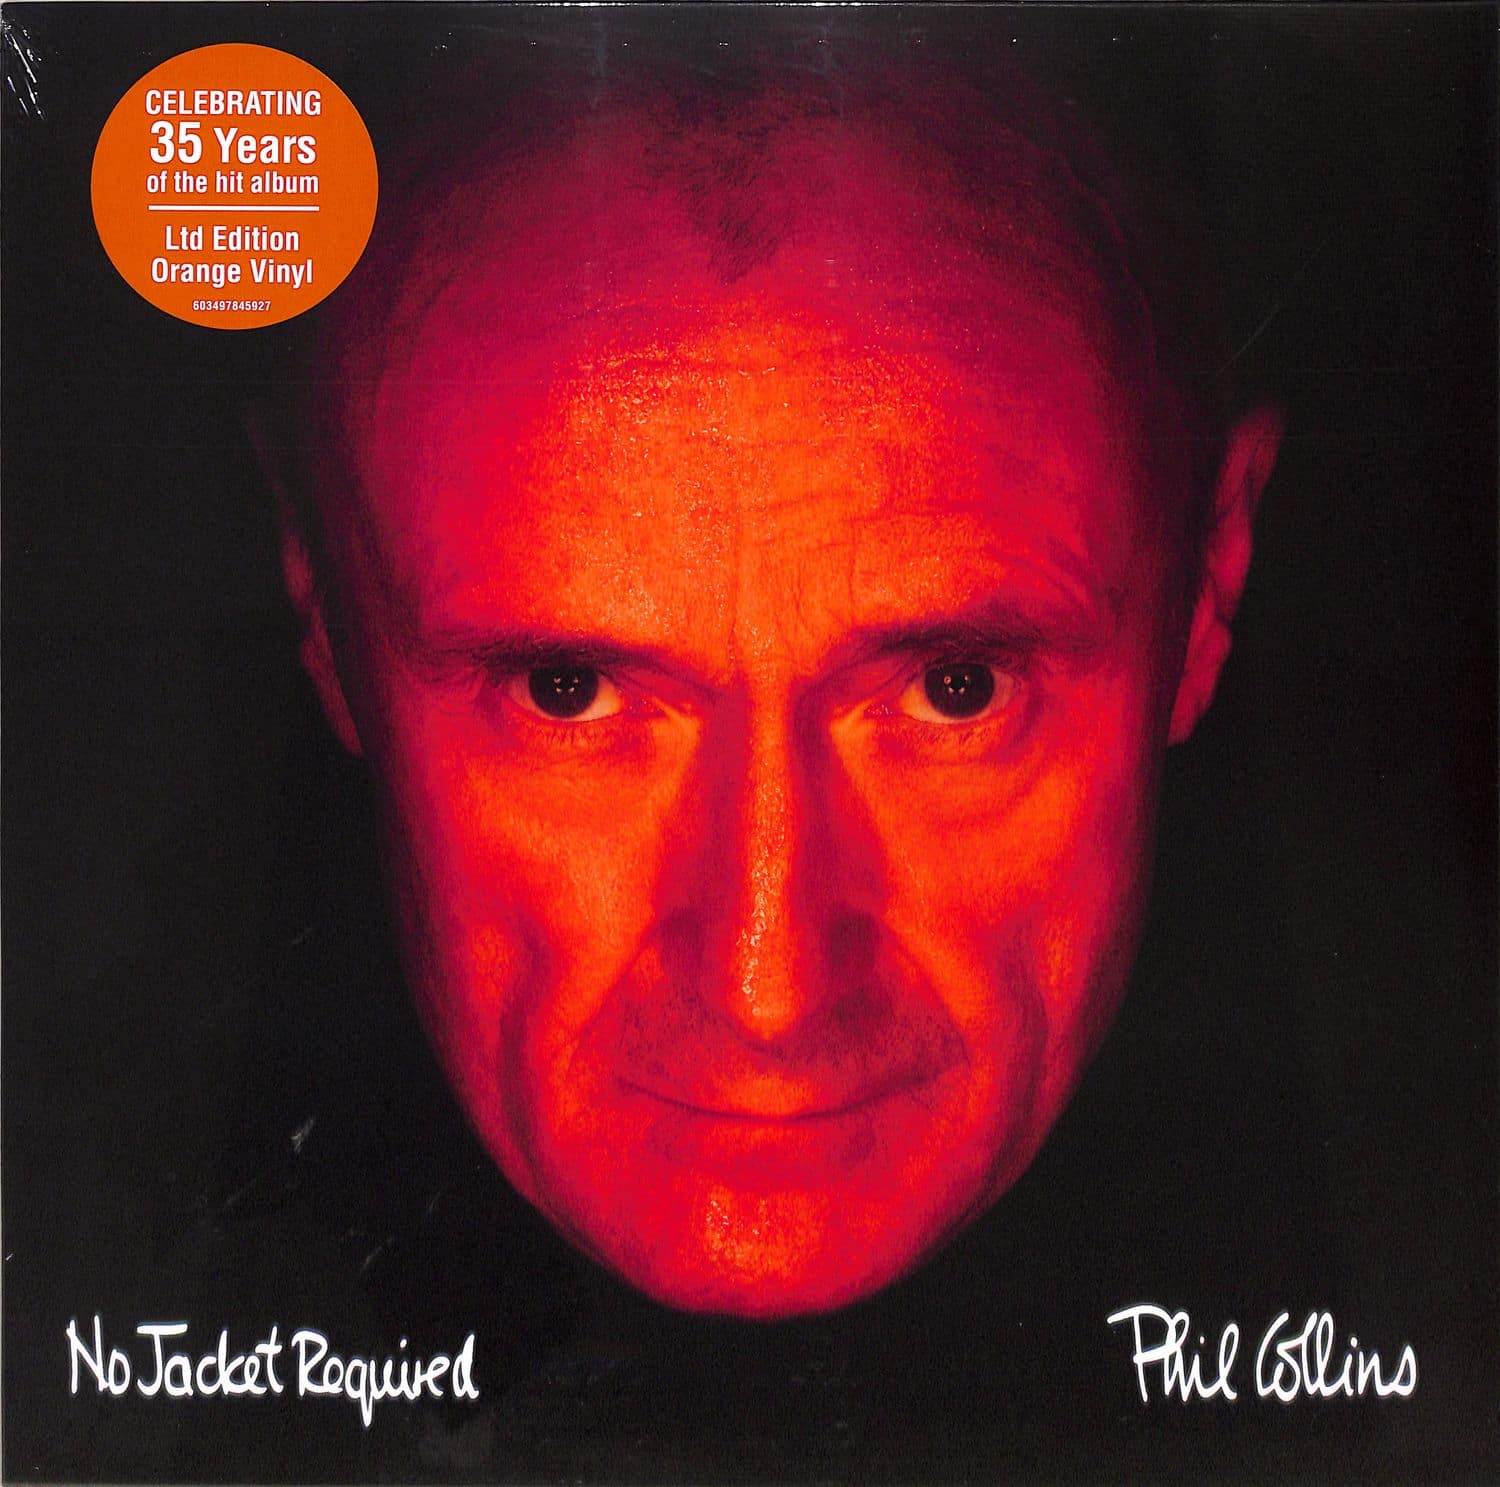 Phil Collins - NO JACKET REQUIRED 